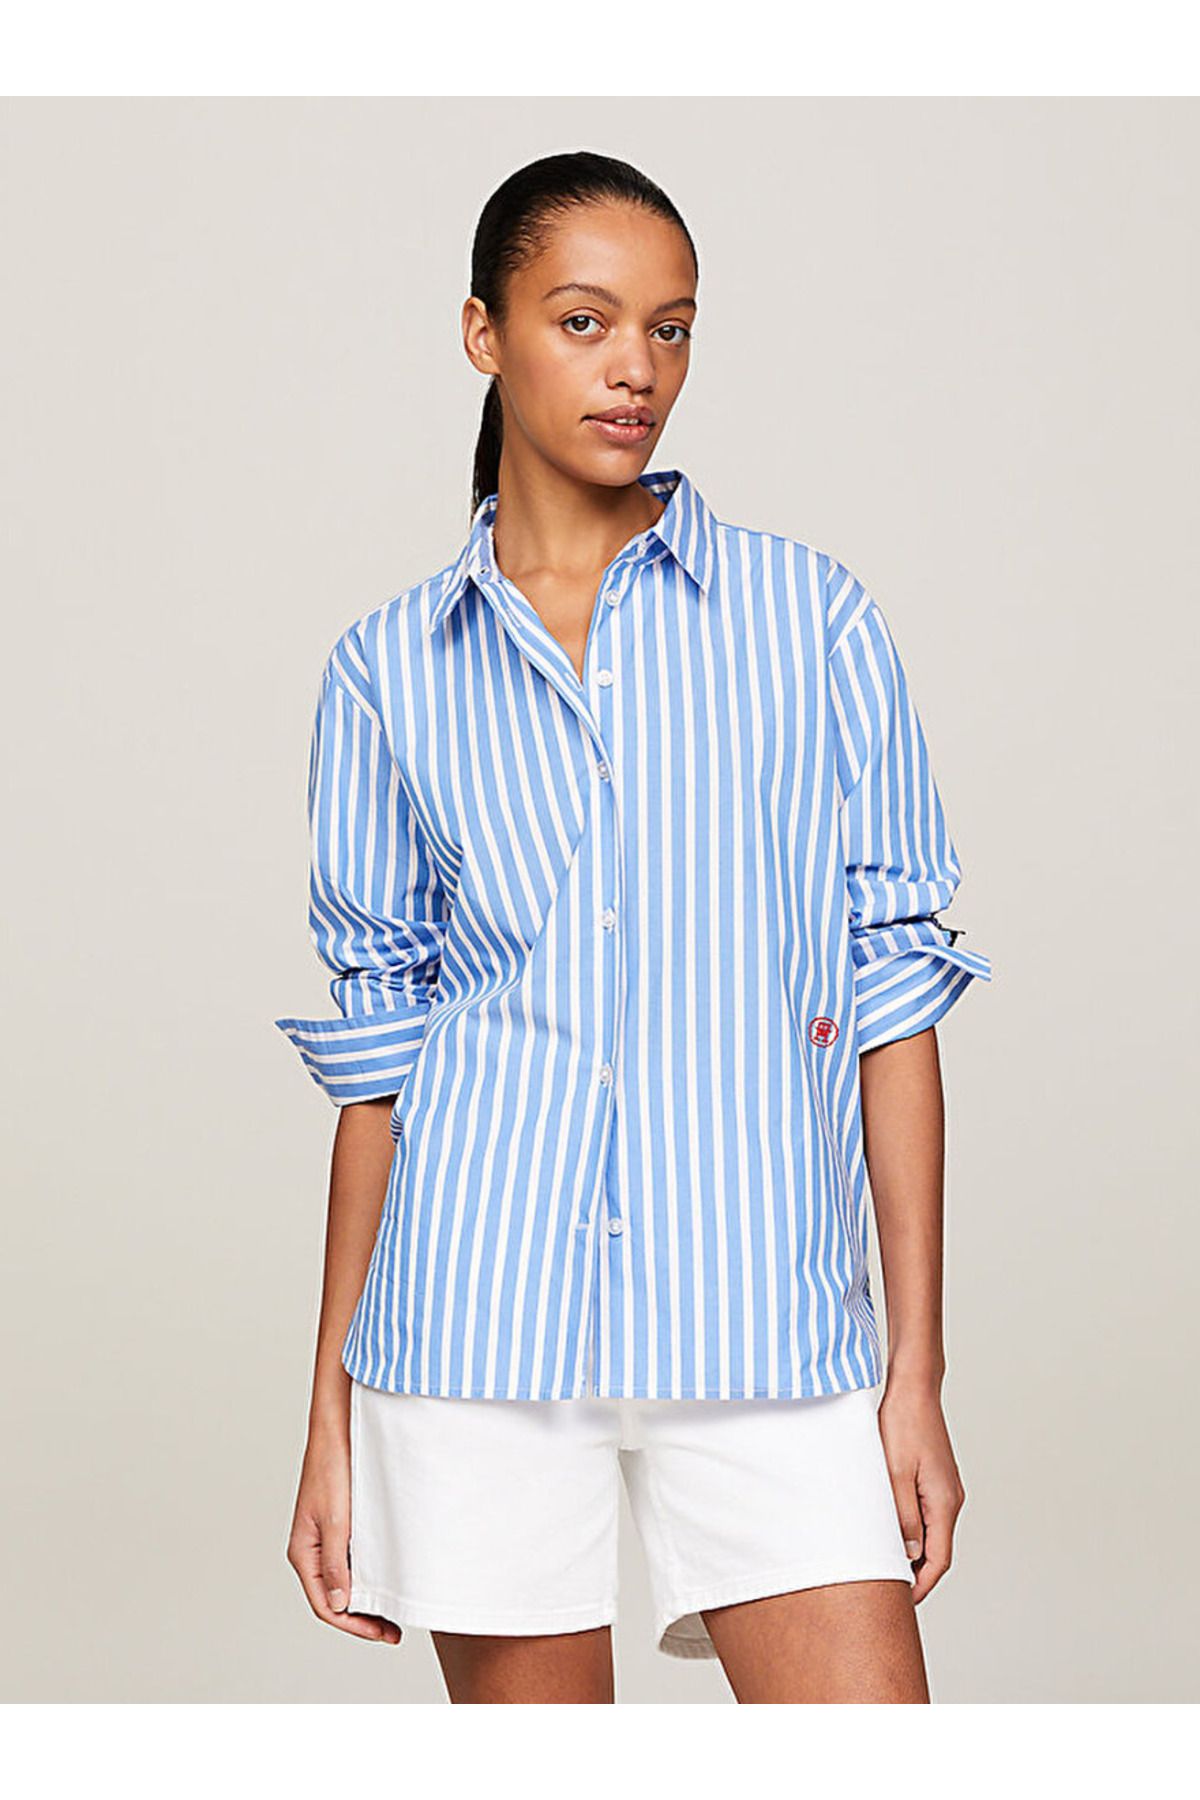 Tommy Hilfiger TH Monogram Stamp Relaxed Stripe Shirt